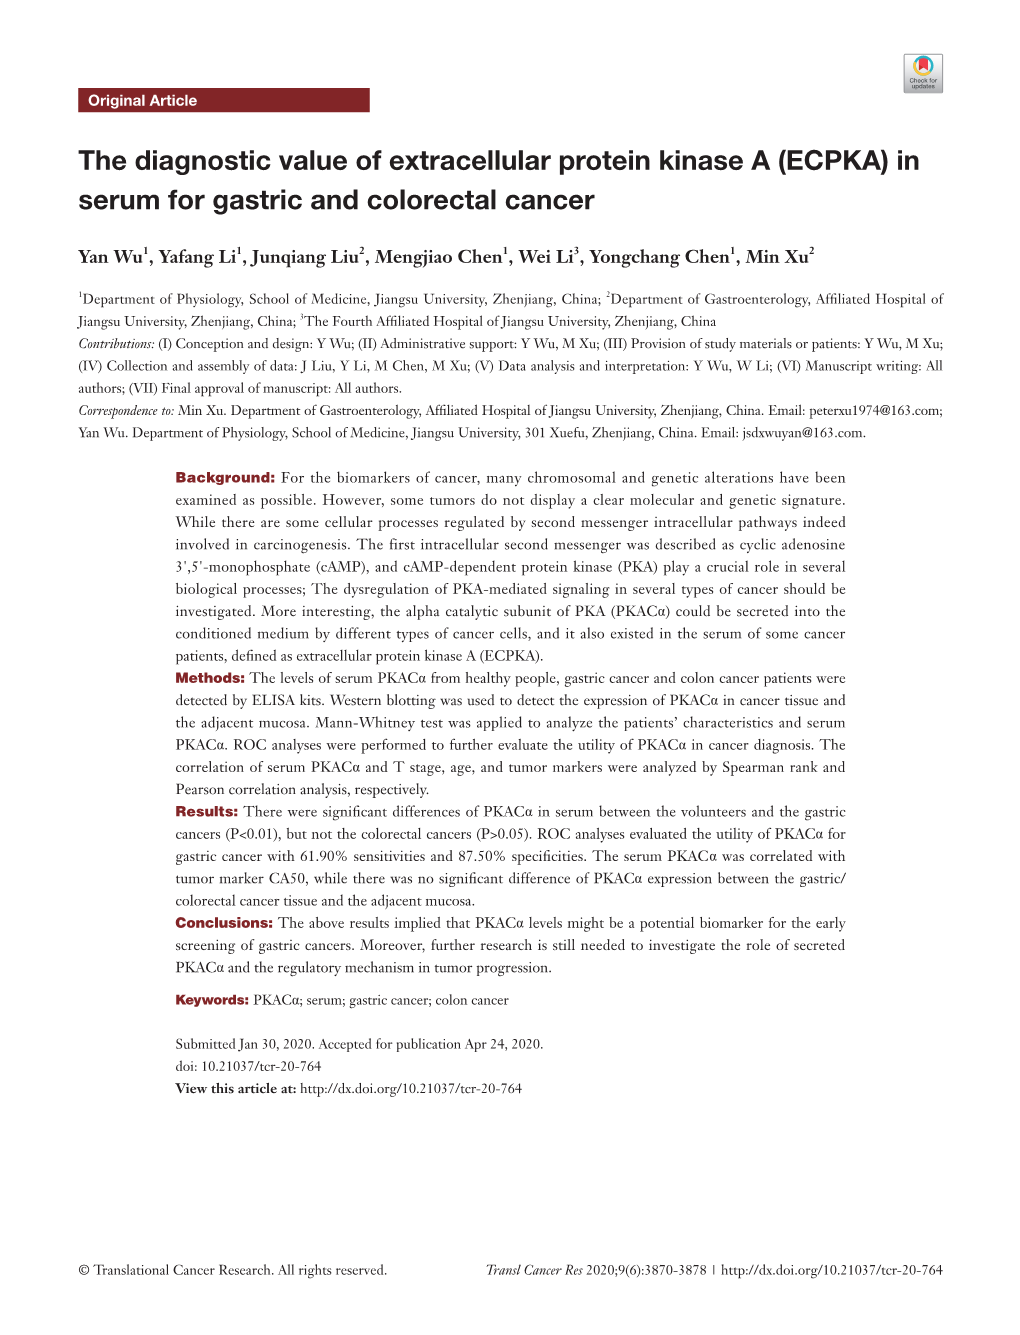 The Diagnostic Value of Extracellular Protein Kinase a (ECPKA) in Serum for Gastric and Colorectal Cancer